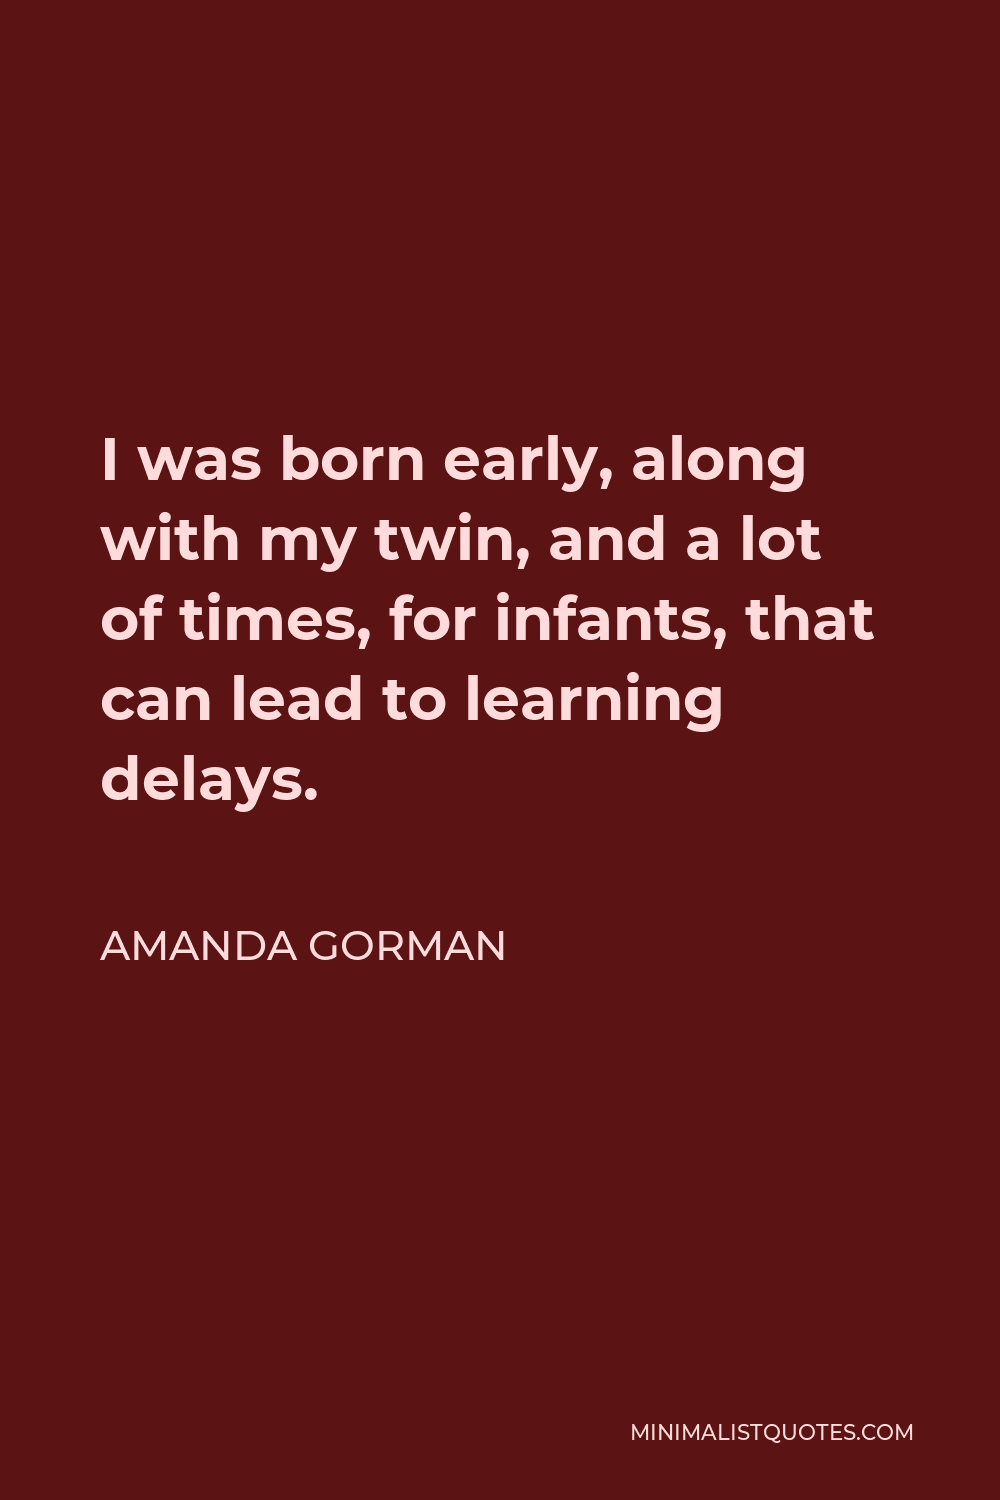 Amanda Gorman Quote - I was born early, along with my twin, and a lot of times, for infants, that can lead to learning delays.